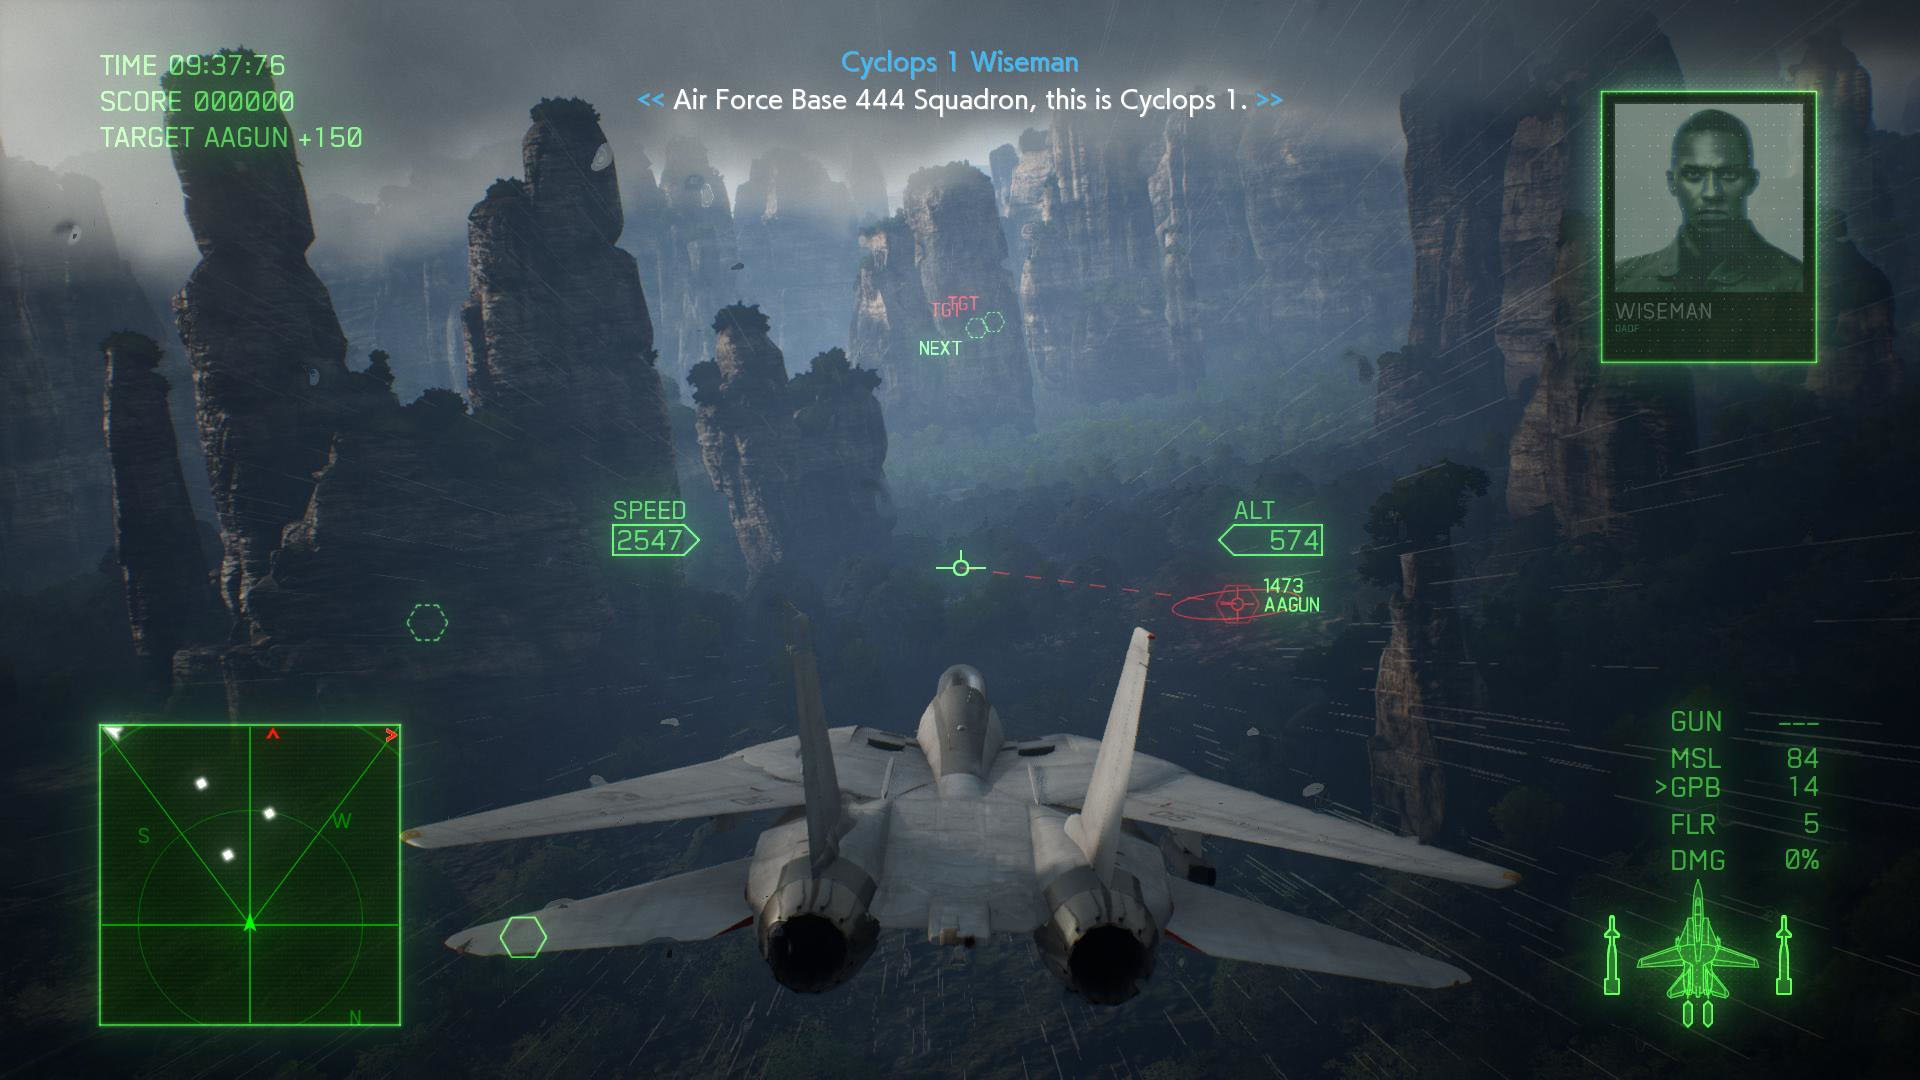 Review - Ace Combat 7: Skies Unknown - WayTooManyGames